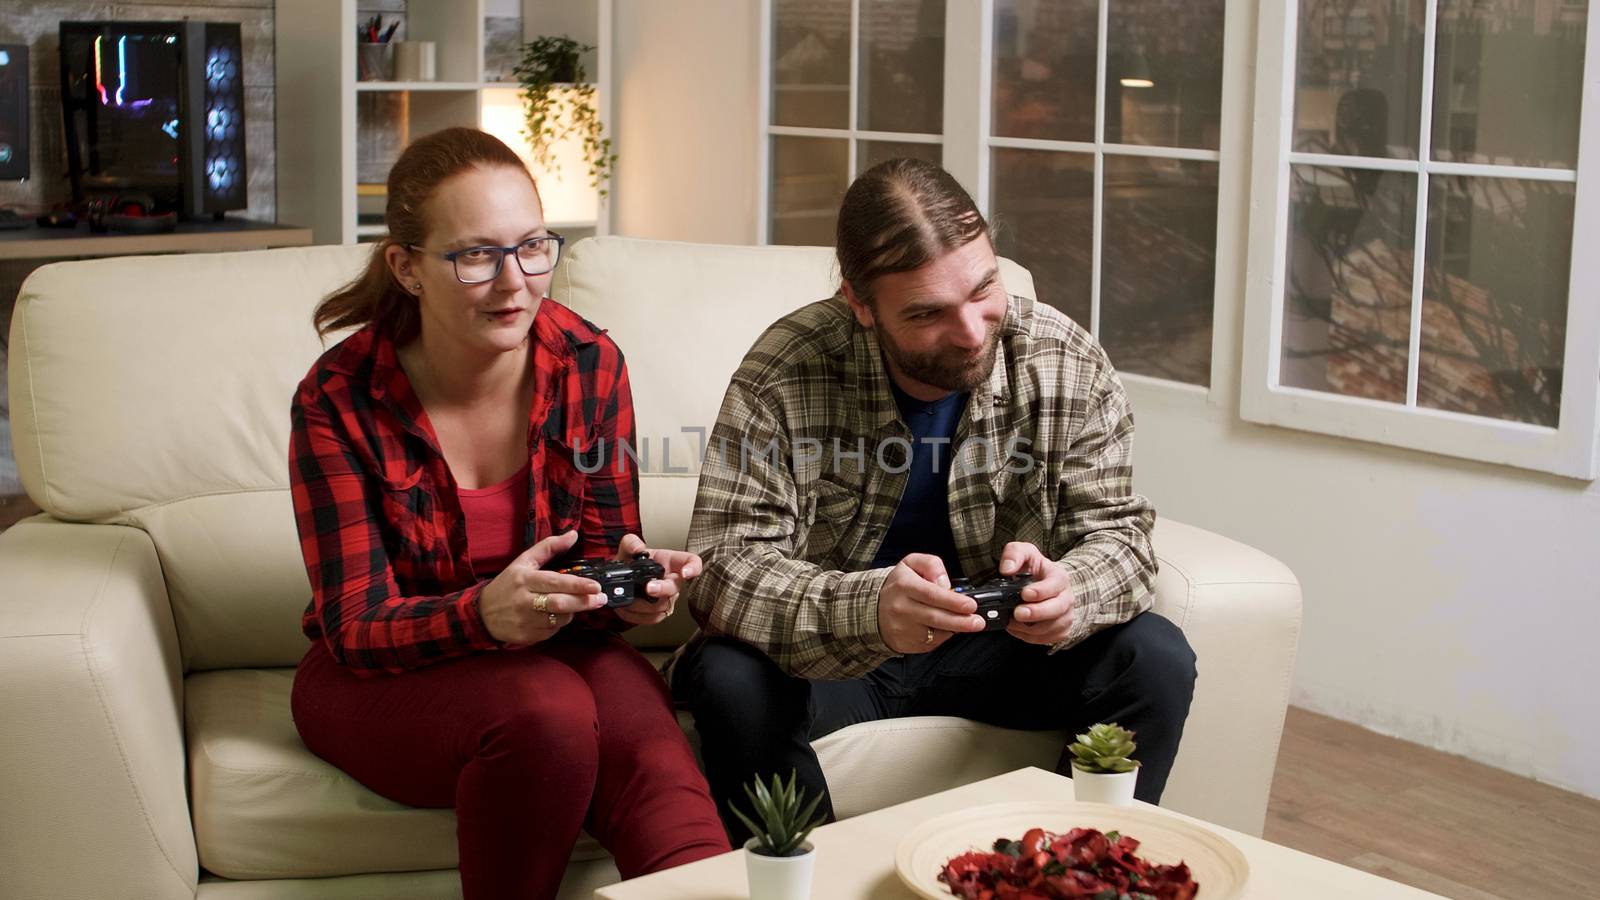 Man and woman sitting on sofa playing video games by DCStudio